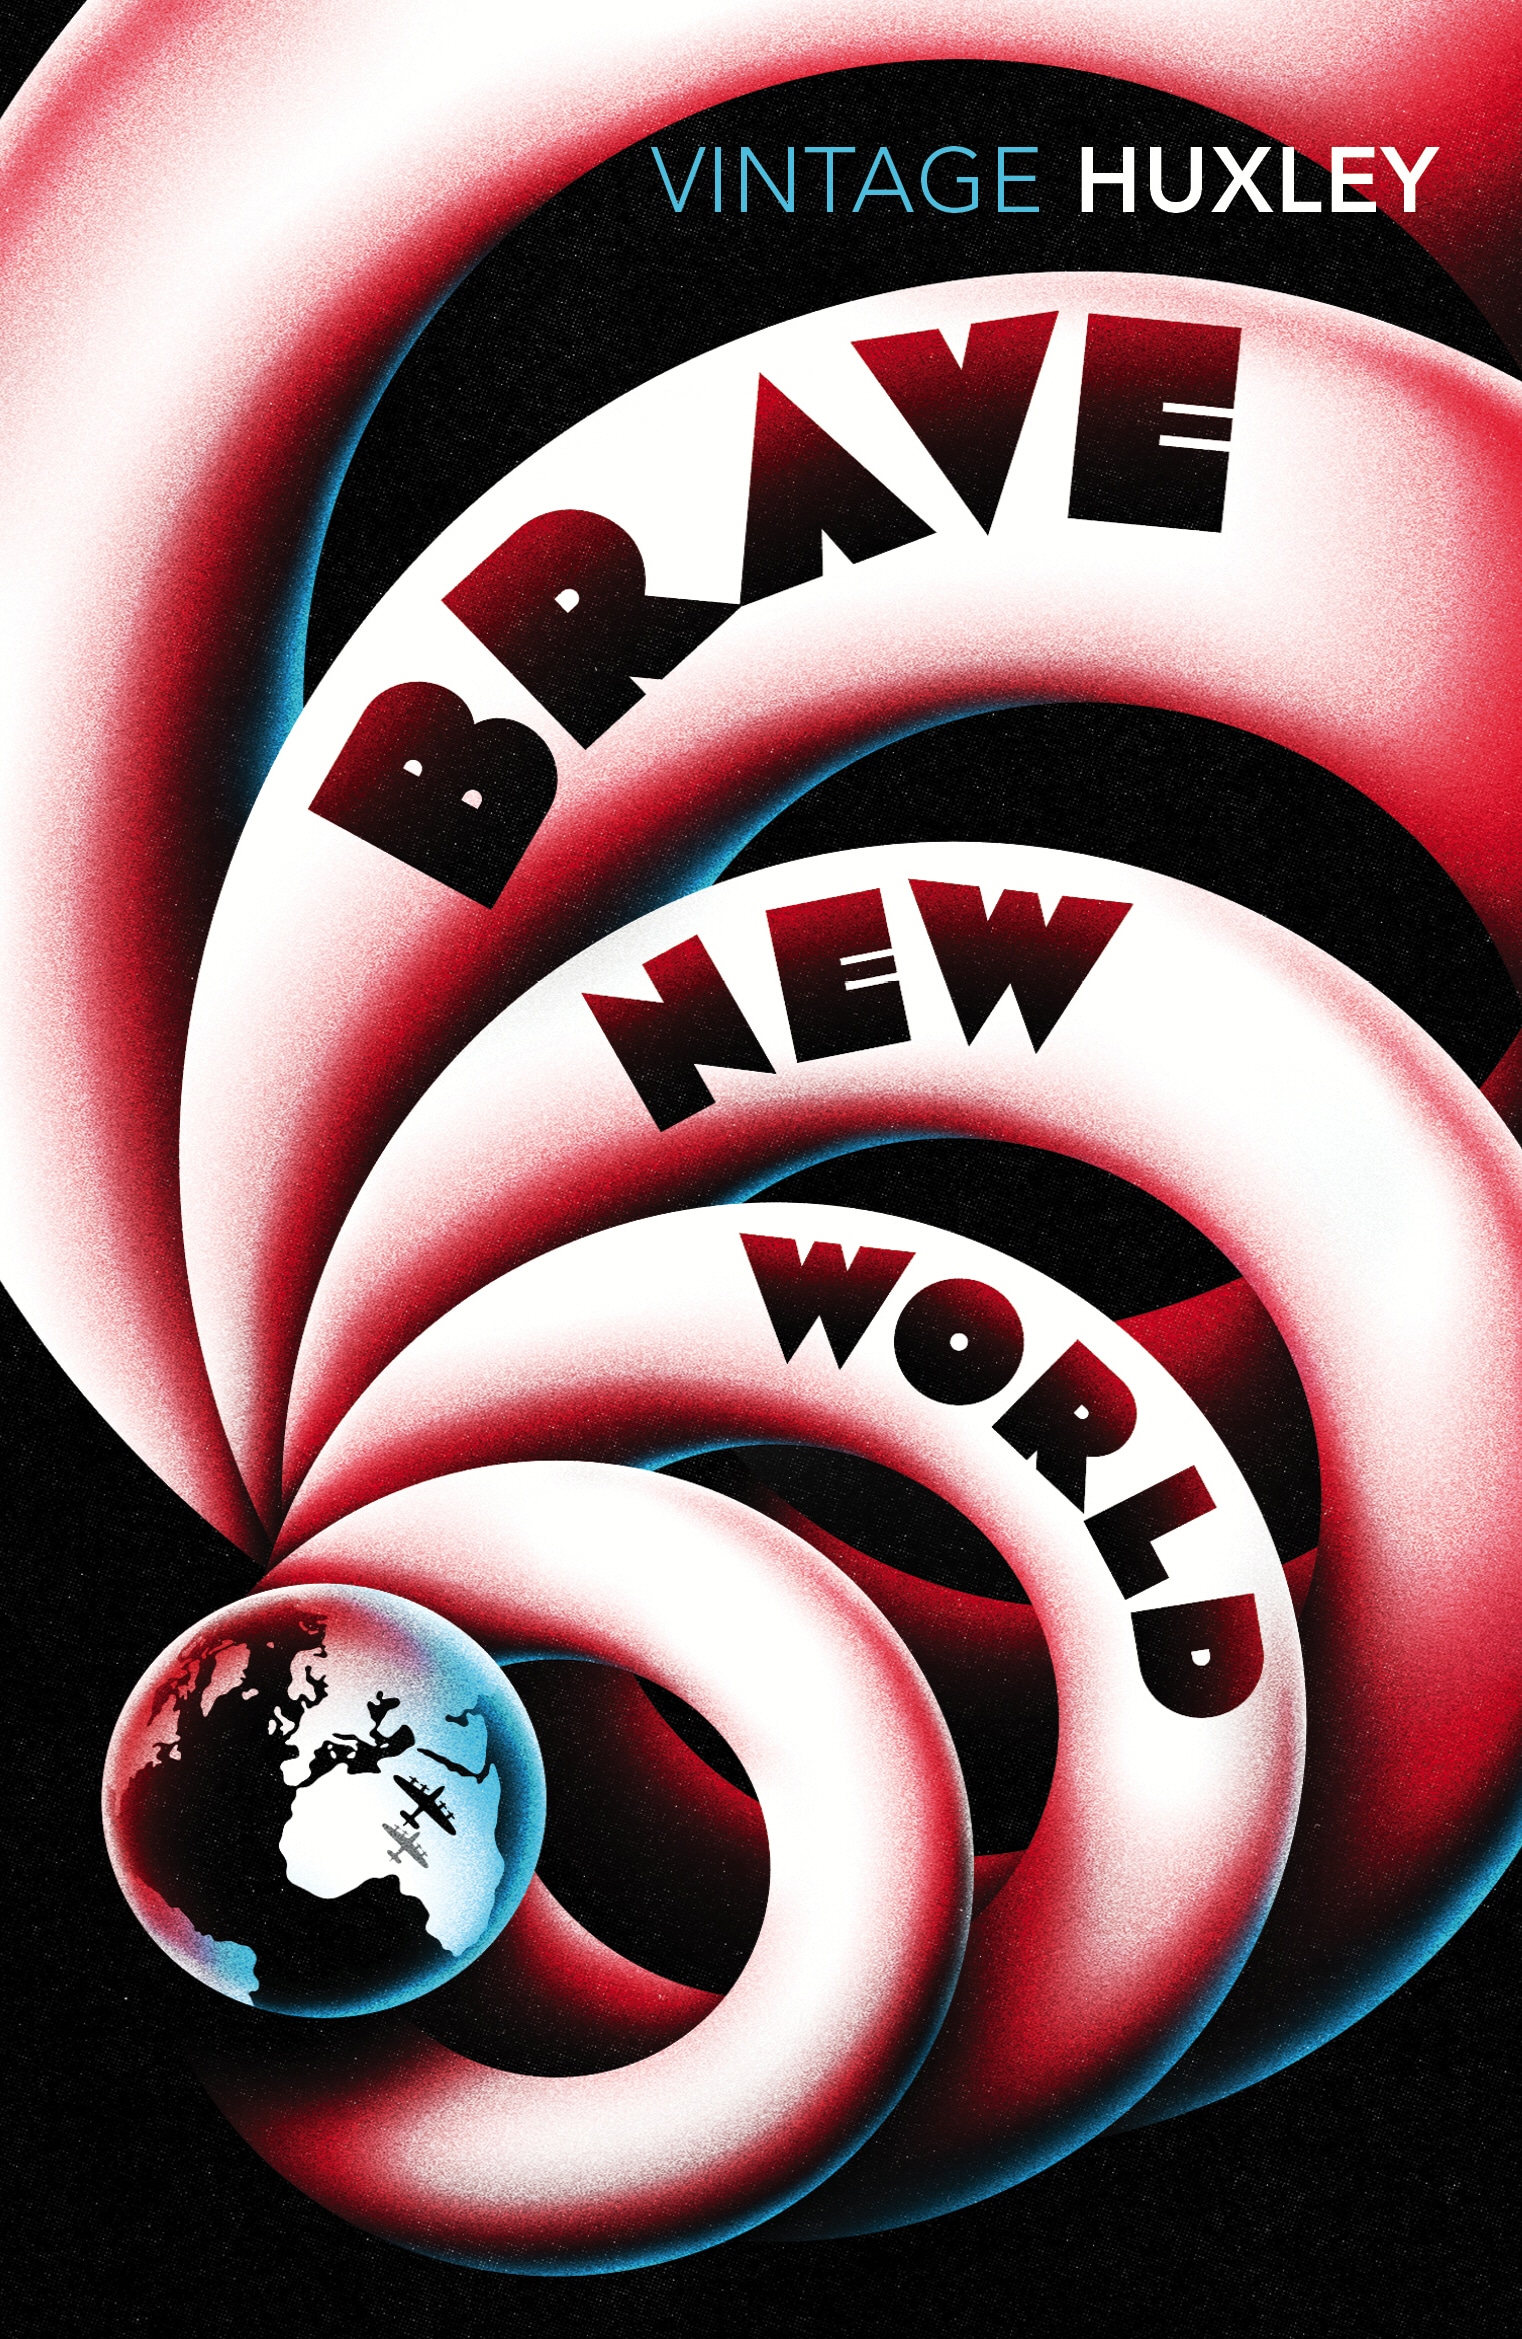 Book “Brave New World” by Aldous Huxley — December 6, 2007